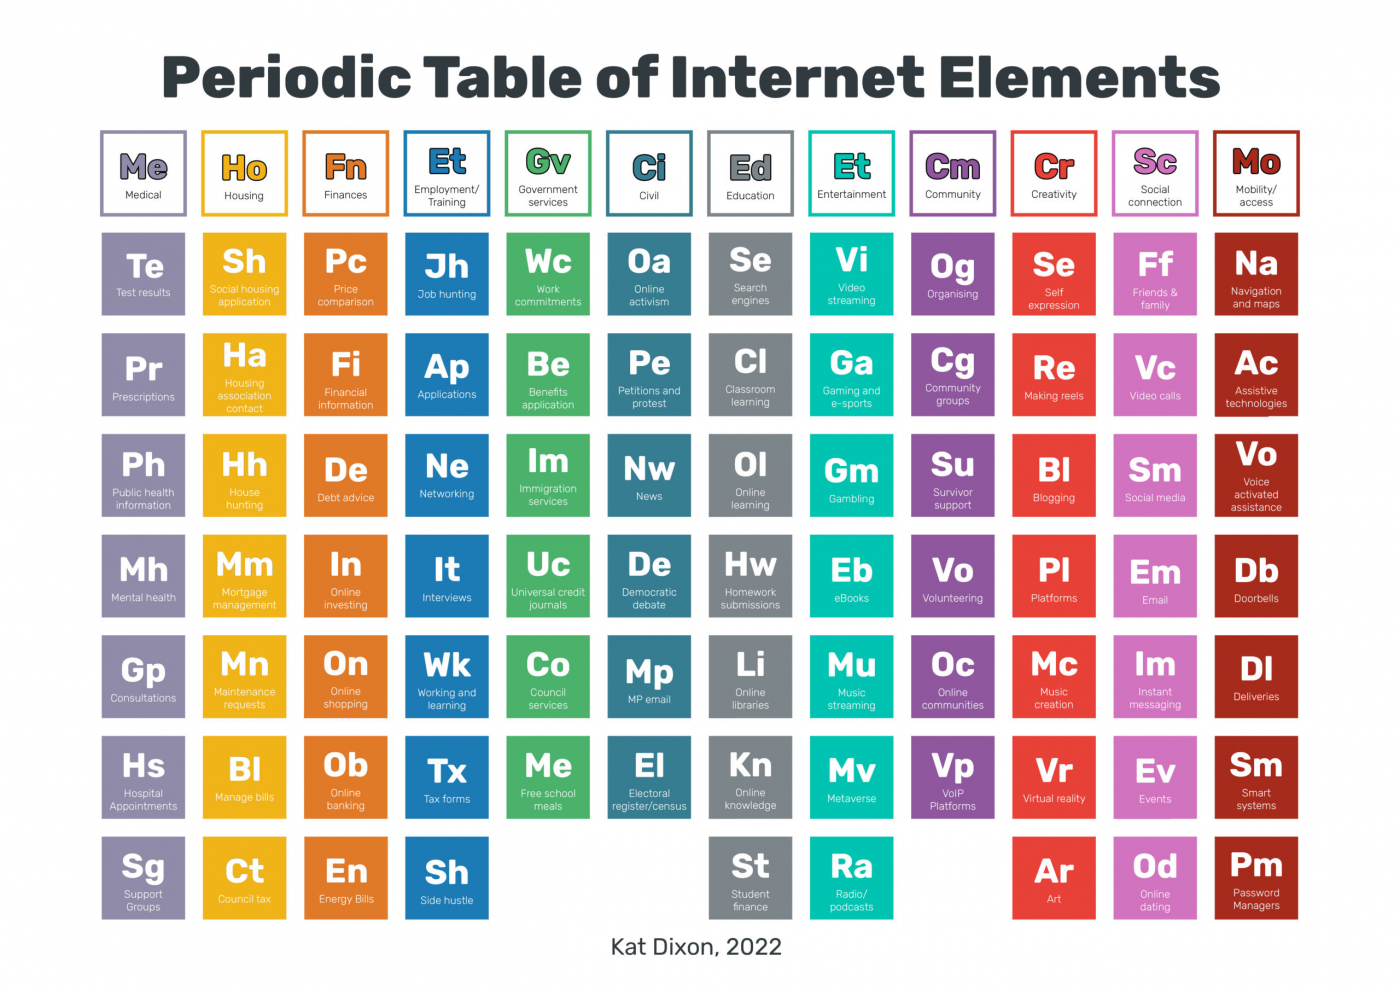 Periodic table of Internet elements